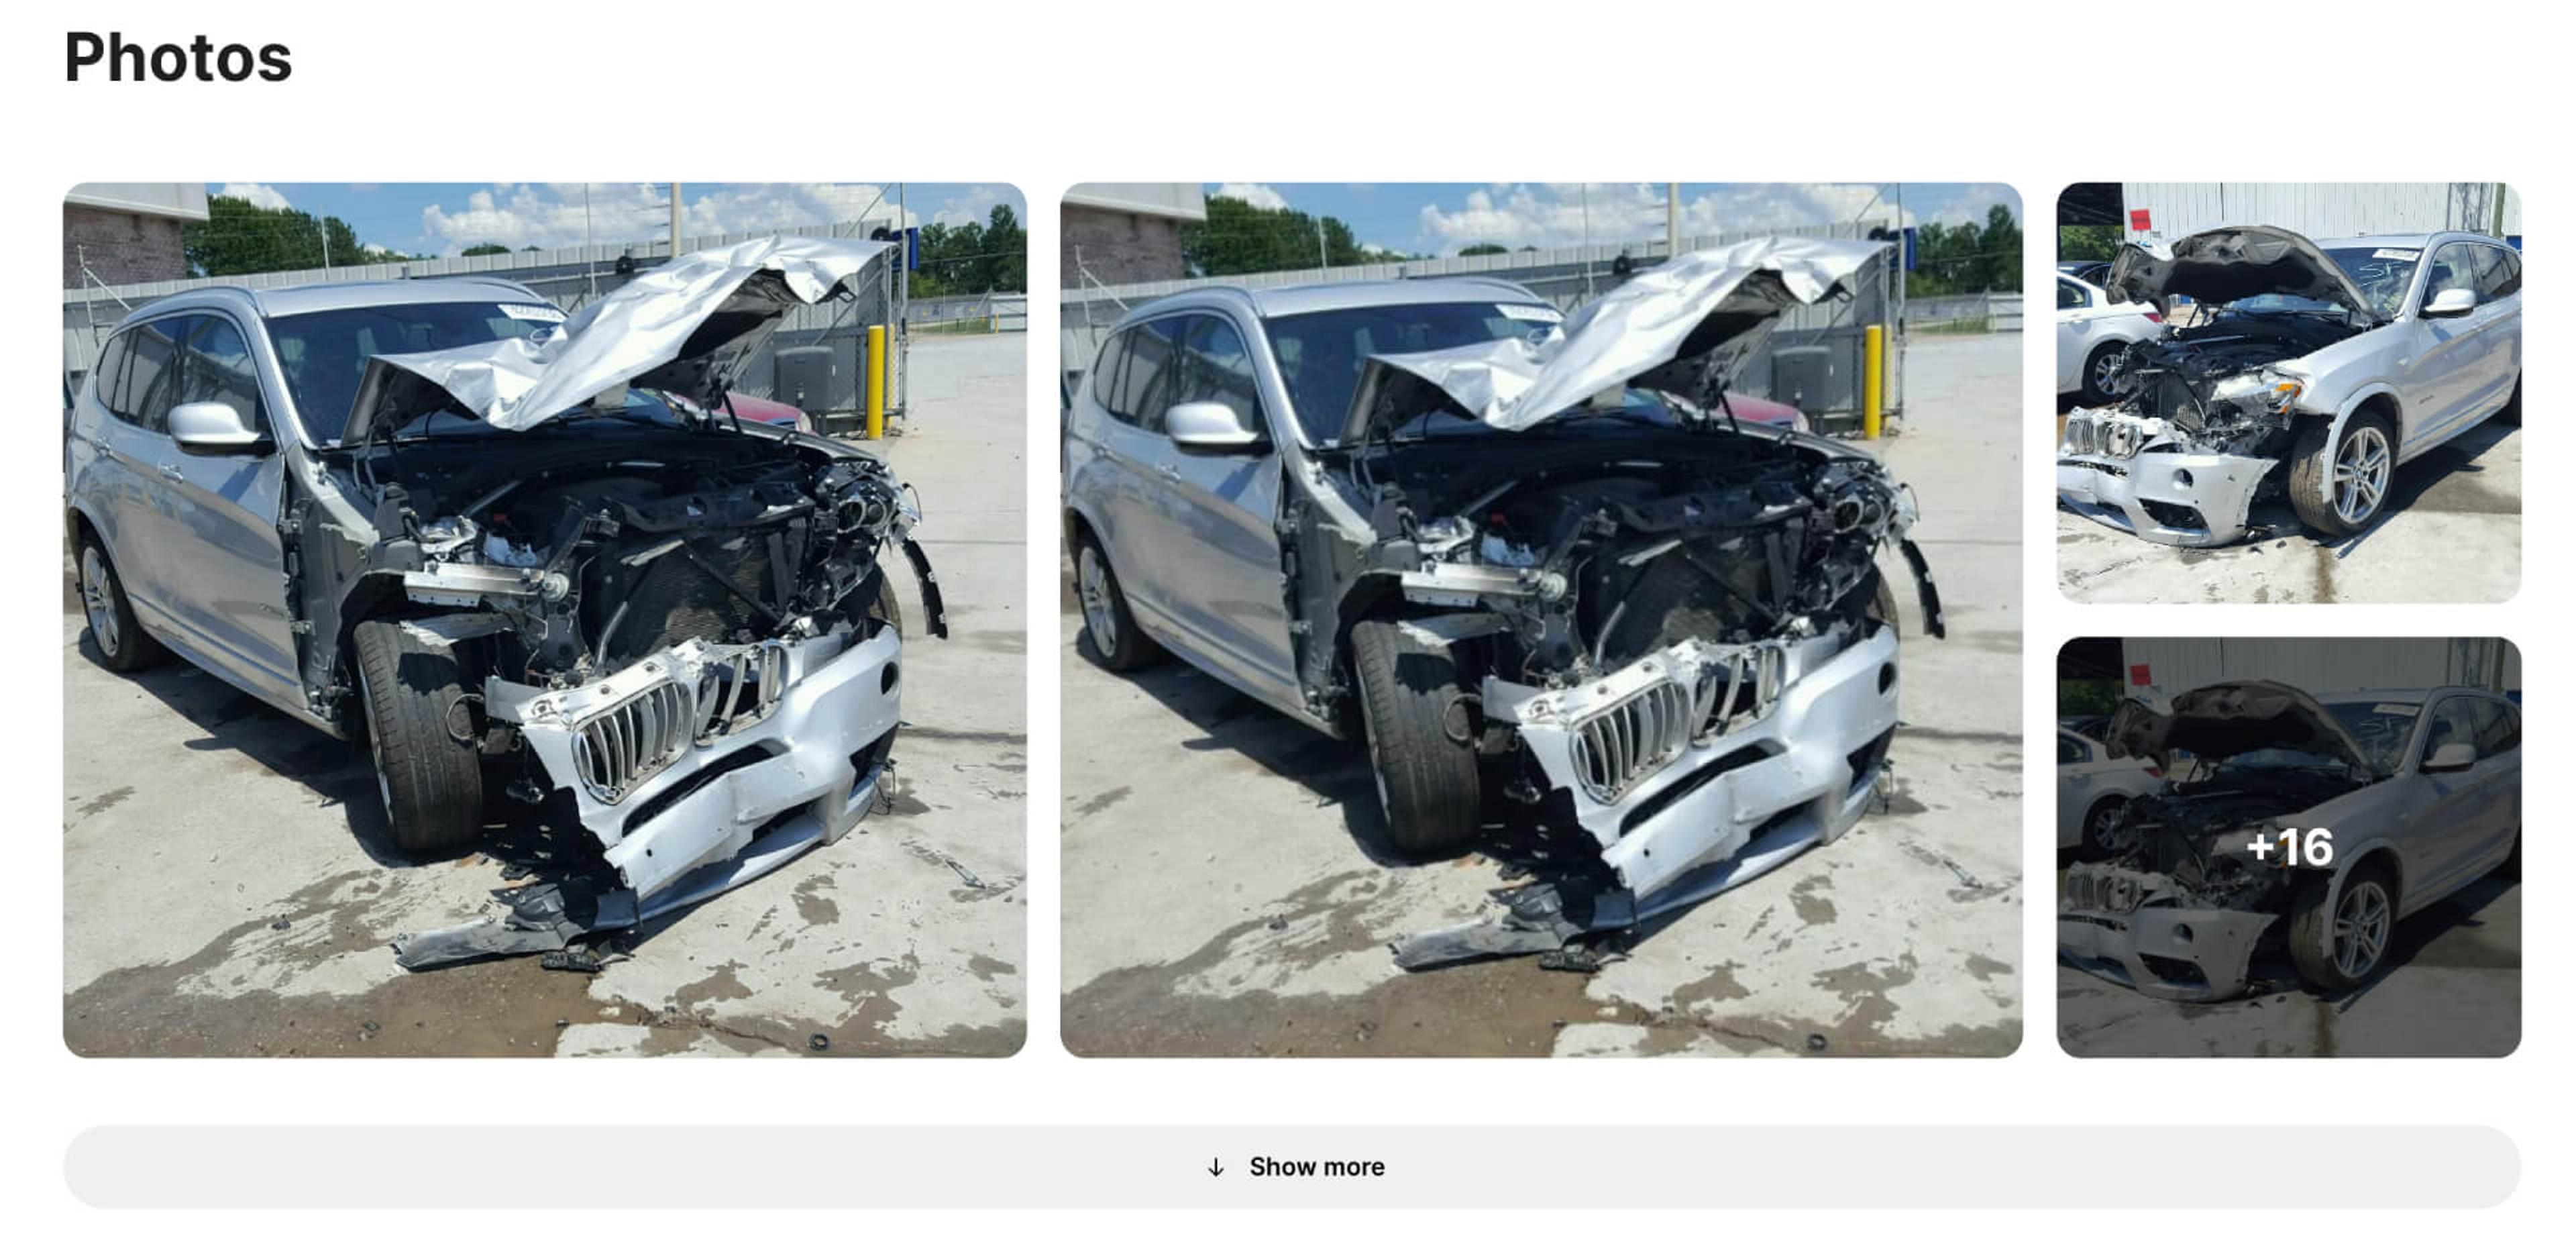 BMW photos after accident found in carVertical report